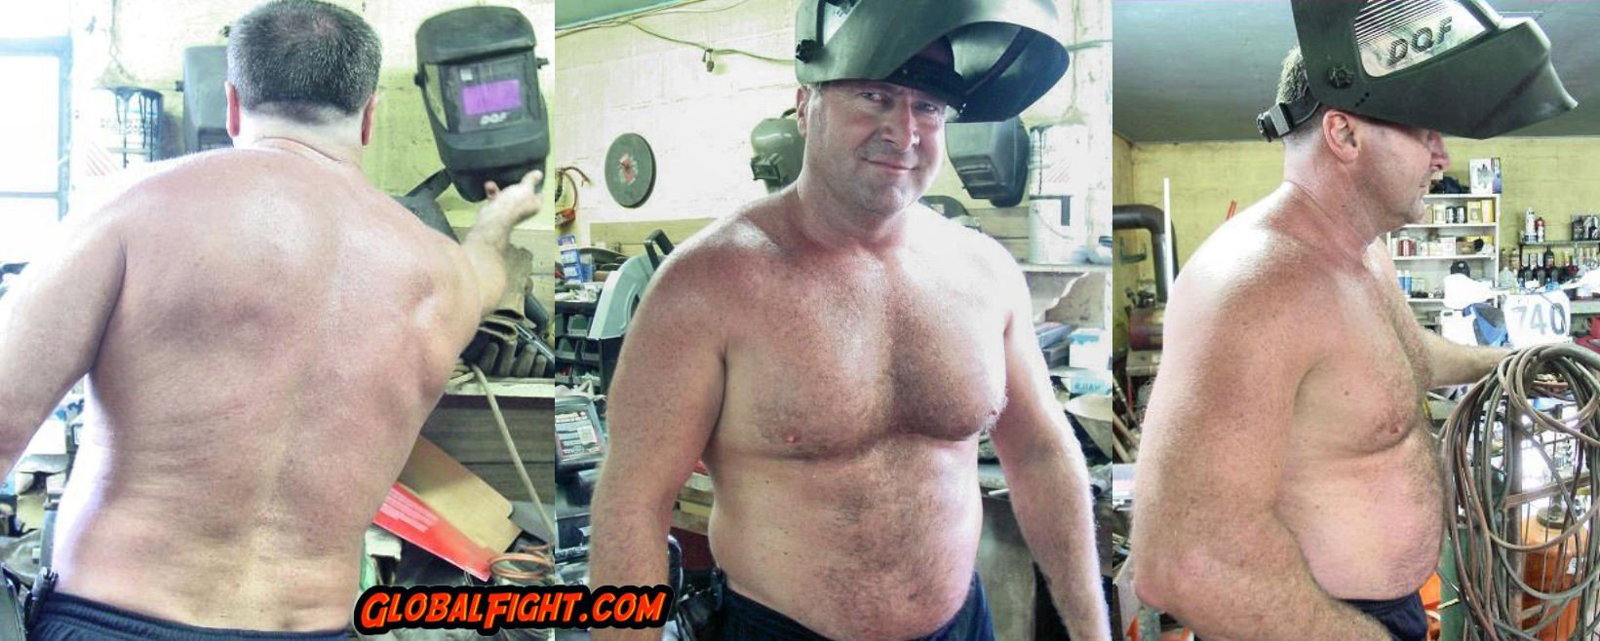 Watch the Photo by Hairy Musclebears with the username @hairymusclebears, posted on February 11, 2023. The post is about the topic Carolina Jim Musclebear. and the text says 'Nude Mechanic VIEW THE VIDEO on his page at GLOBALFIGHT com  --  #gaydaddys #gaydare #HairyChested #hairyhunk #hairytrail #hairymale #HairyNSFW #nsfwtwt #dads #daddynsfw #masculinity #MachoAlfa #machosgay #AlphaBoys #gay #gaybear'